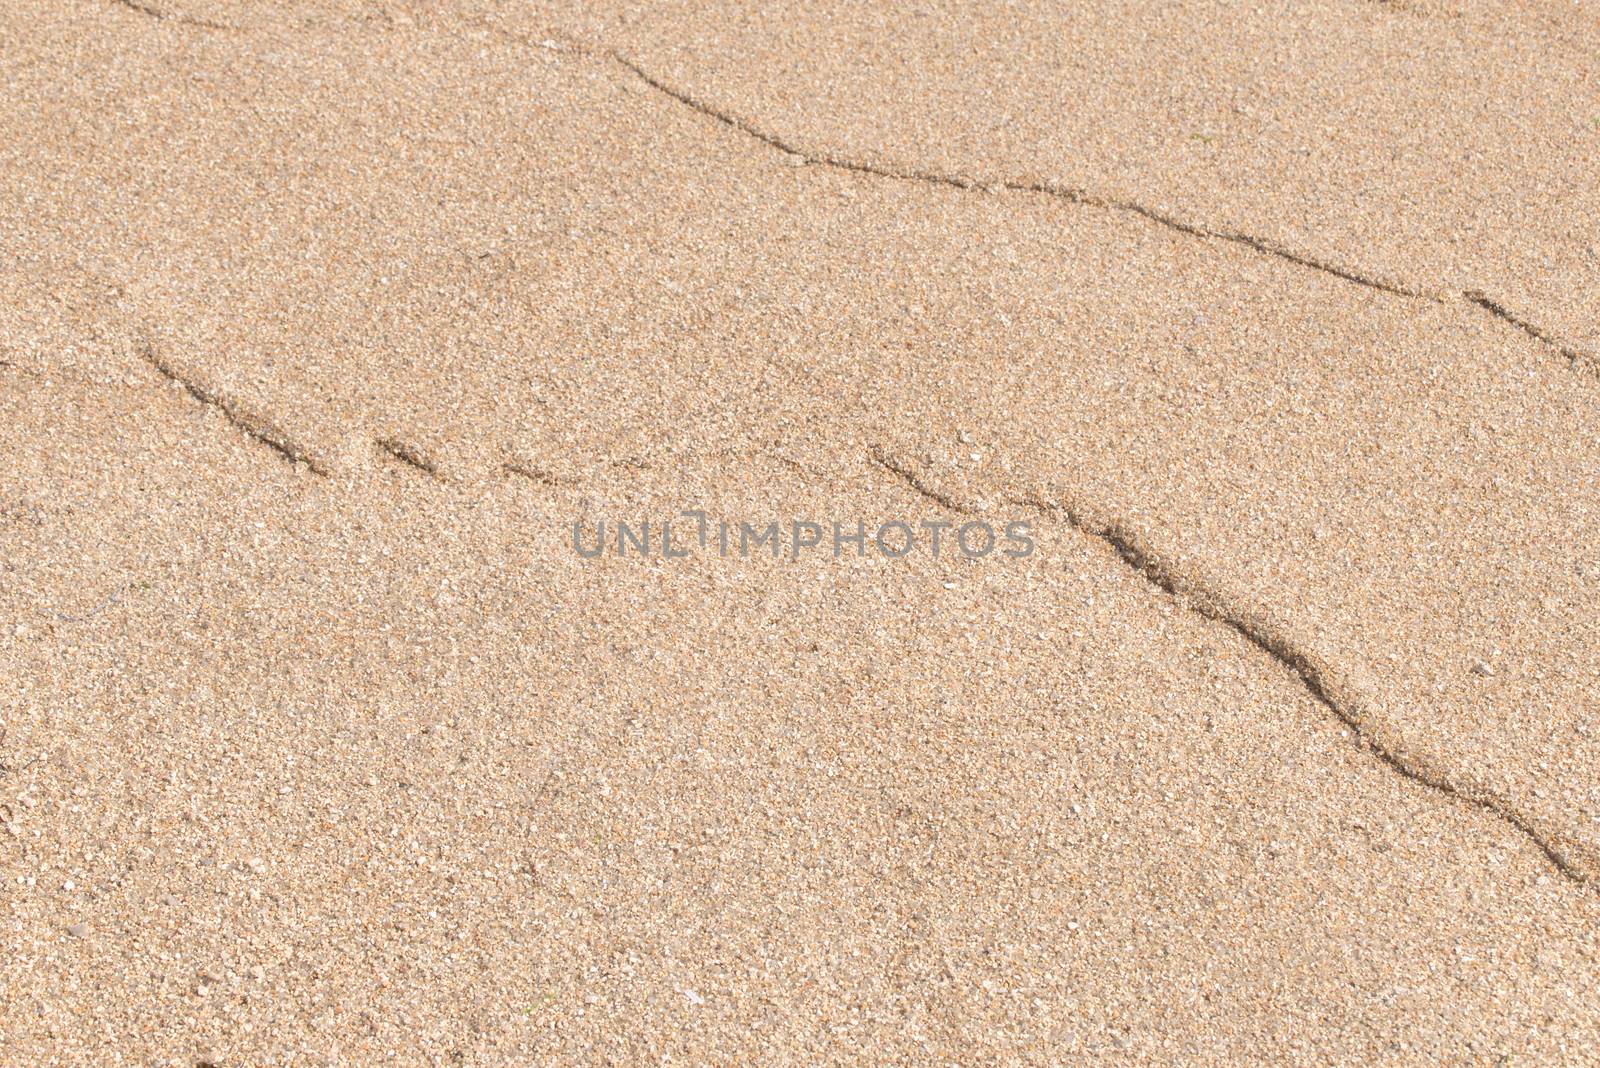 Sand texture. Sand on the beach. Sandy beach for background. Top view